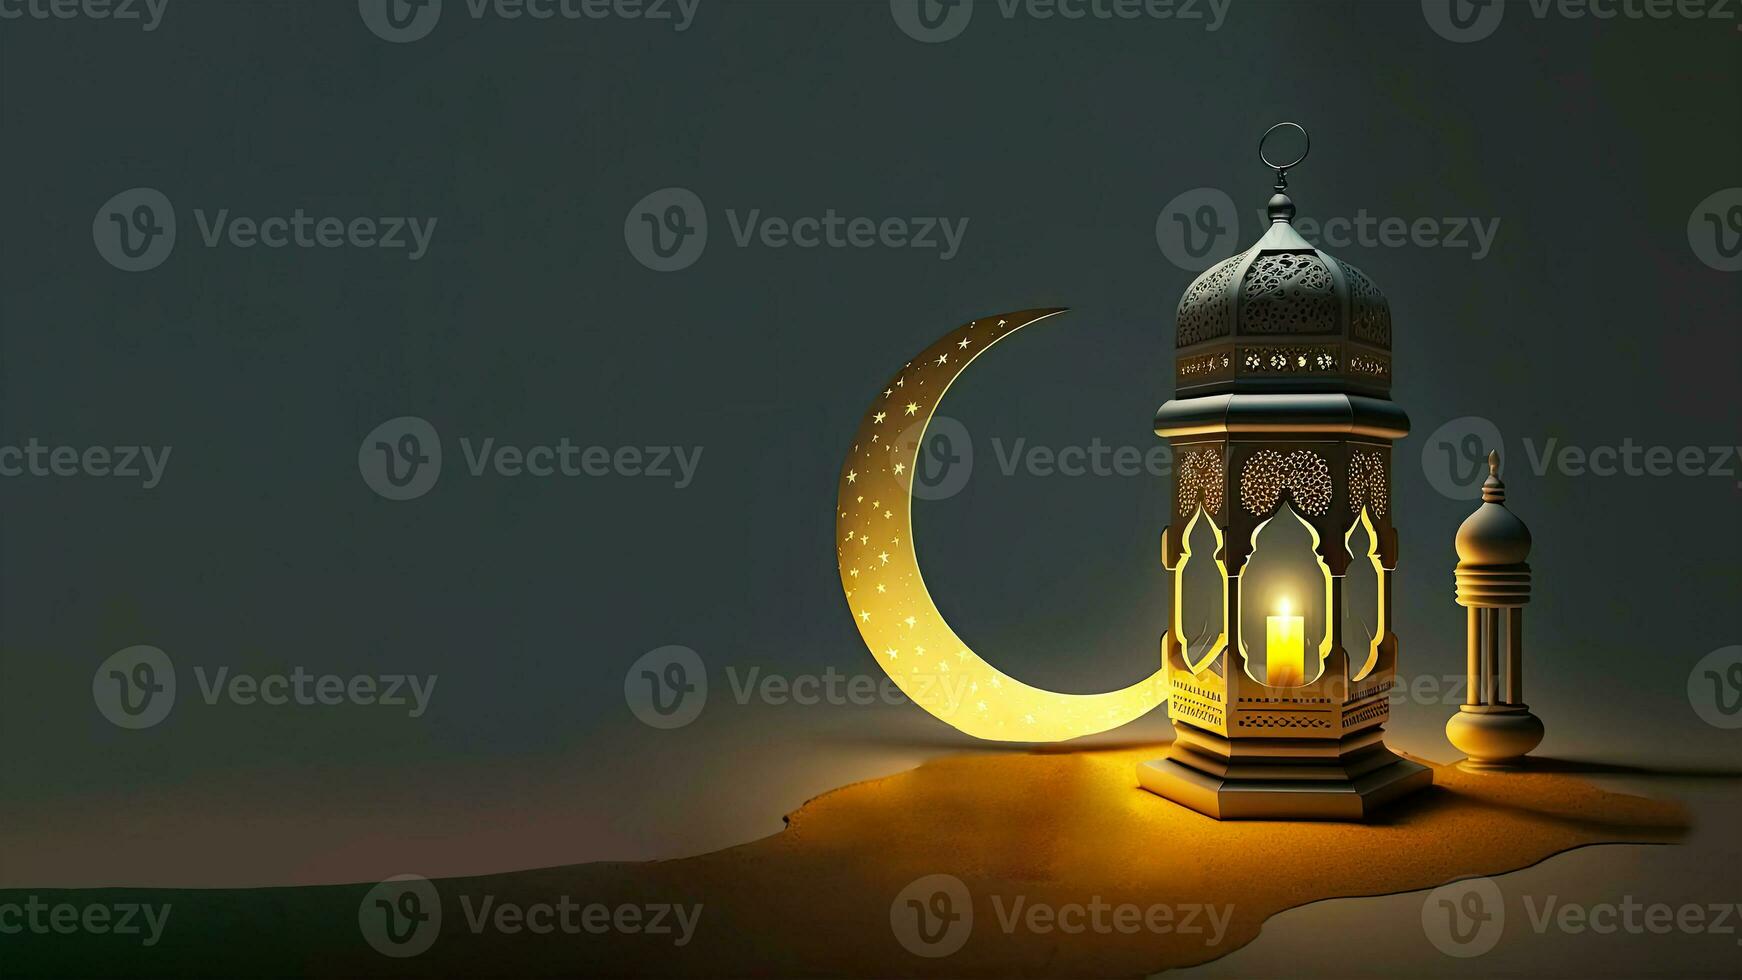 3D Render of Illuminated Arabic Lamp With Crescent Moon On Sand Dune. Islamic Religious Concept. photo